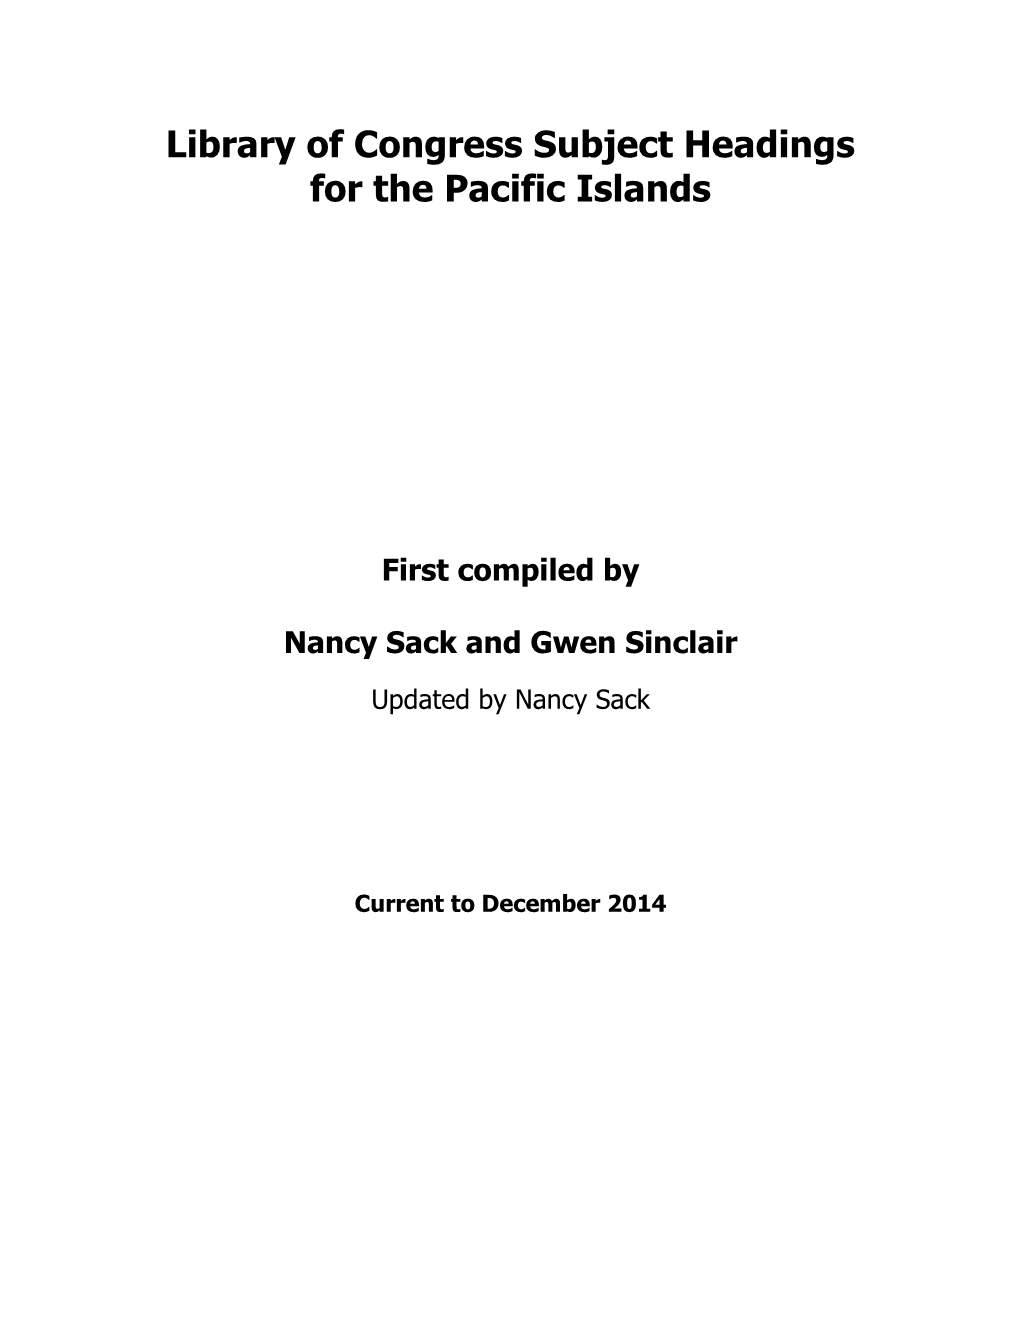 Library of Congress Subject Headings for the Pacific Islands